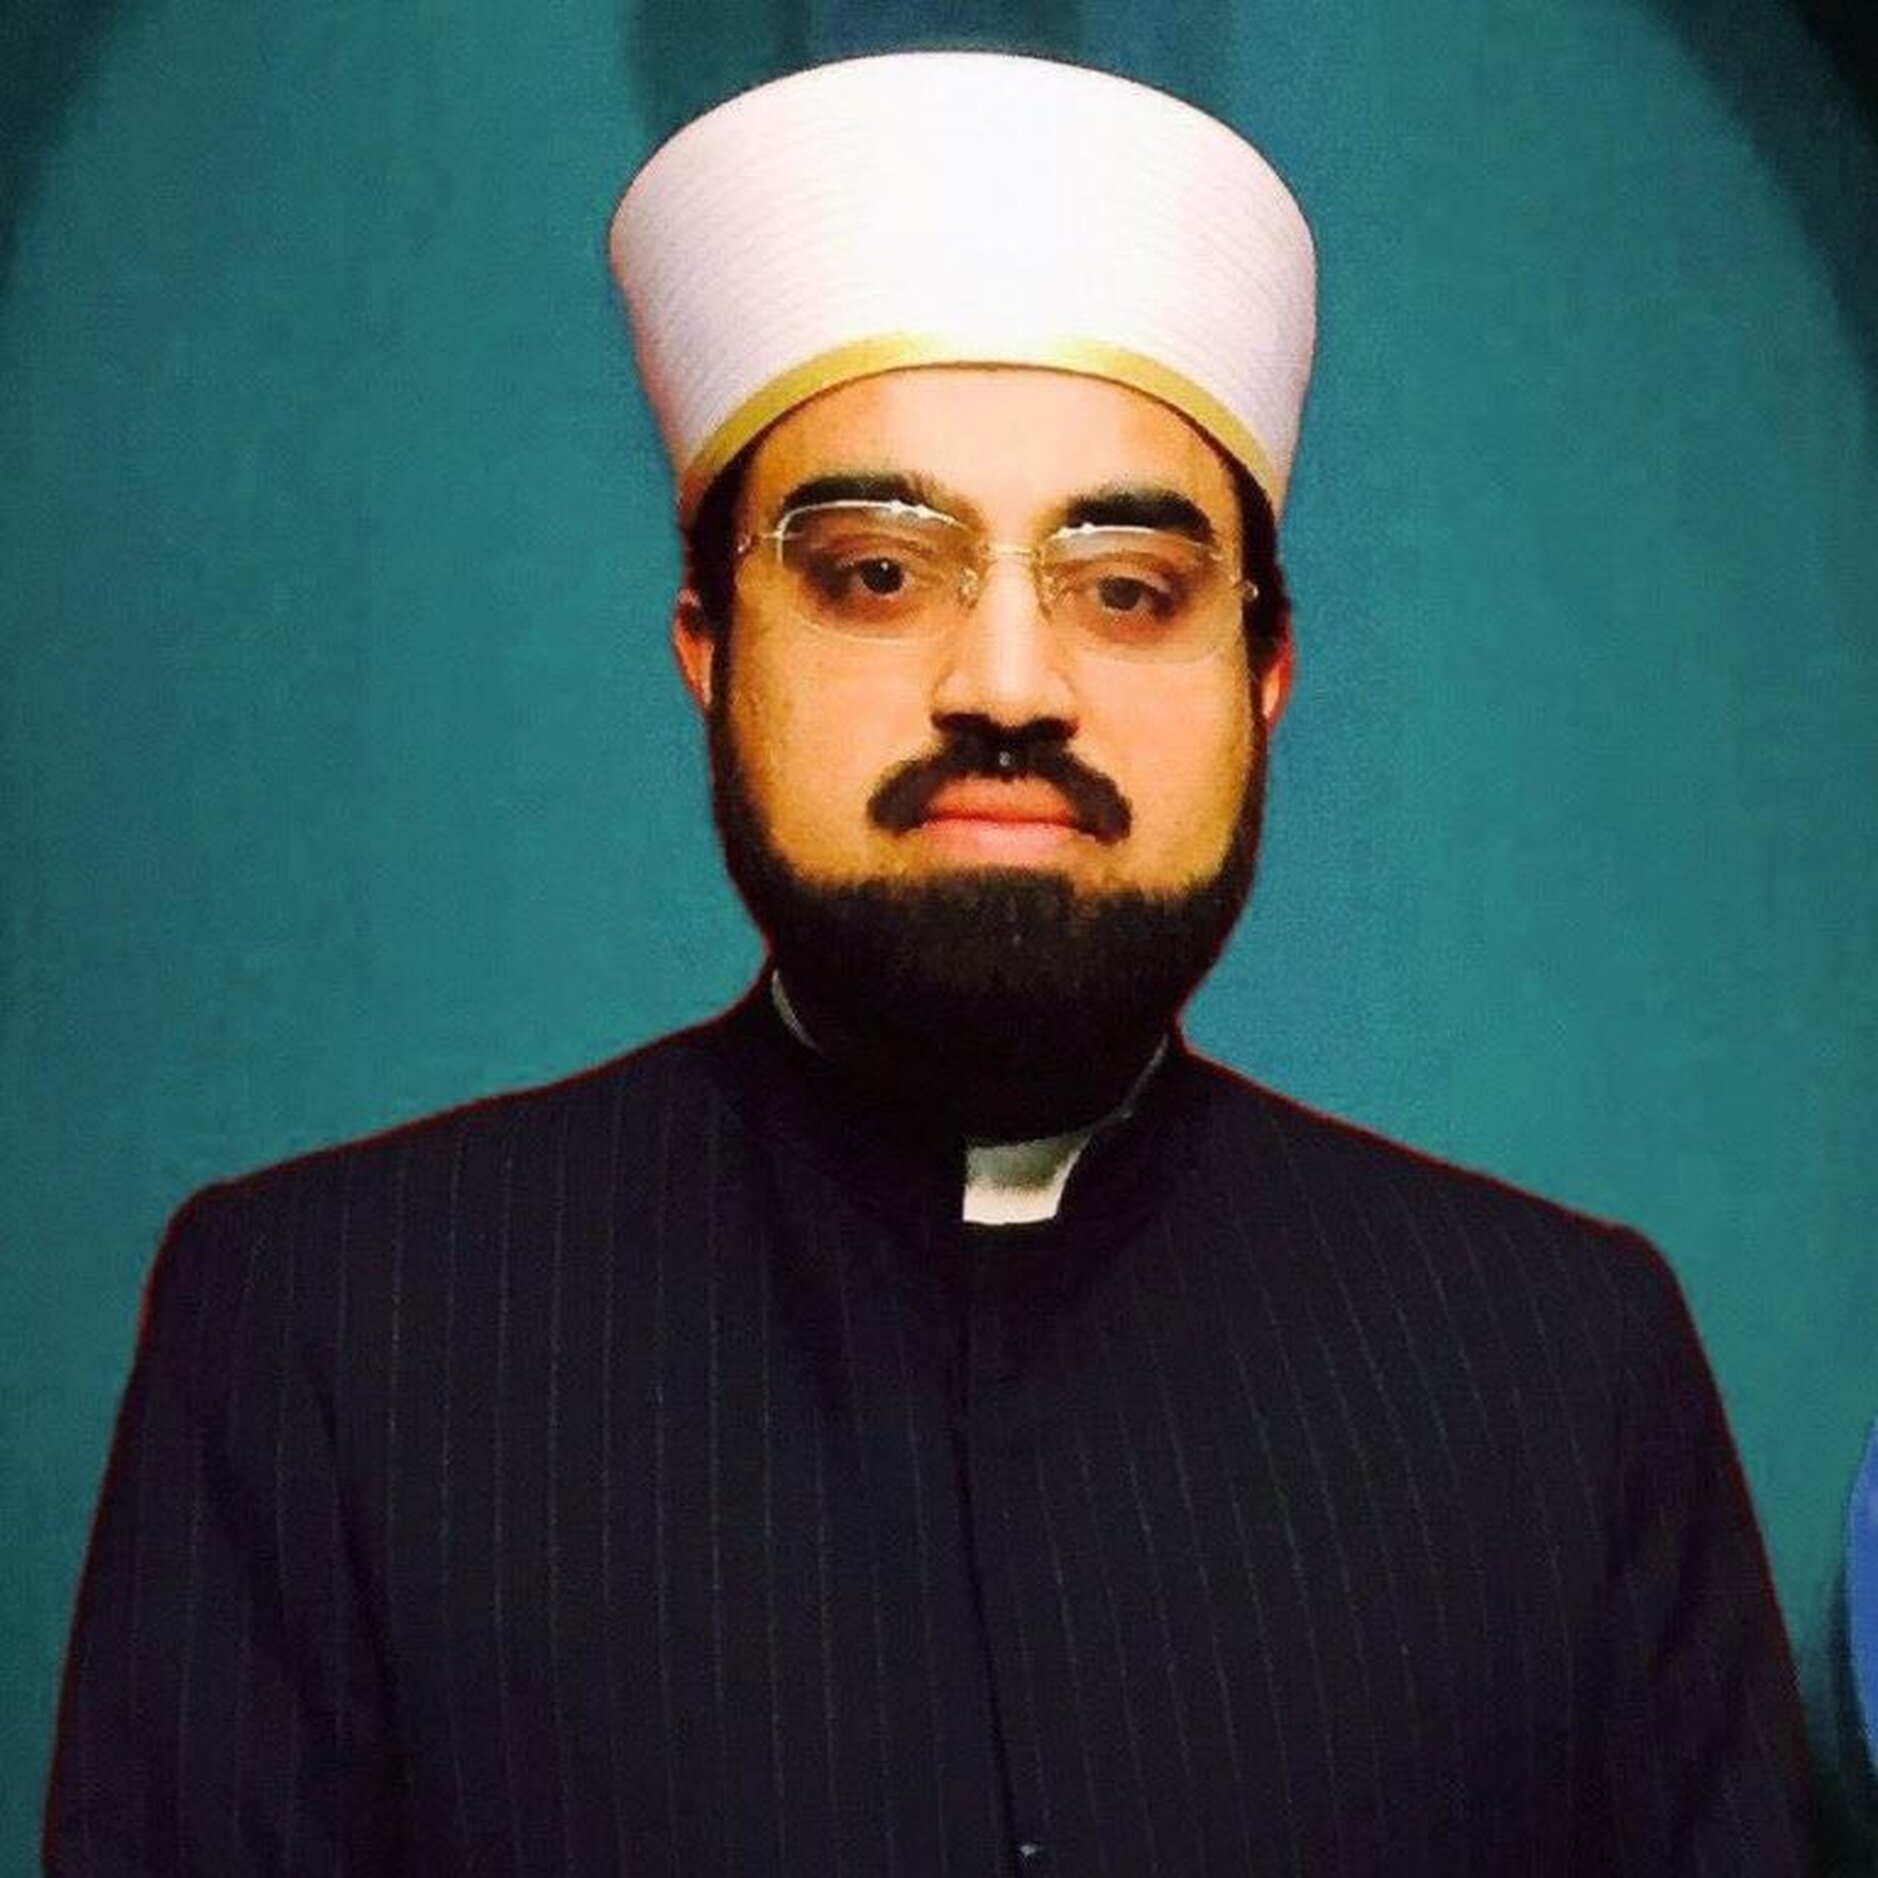 Archbishop of Dublin Stands in Solidarity with Imam Following Attack - Archbishop Michael Jackson has condemned an attack on Shaykh Dr Umar Al Qadri which took place in Dublin yesterday evening (Thursday February 15). Dr Al Qadri is Chairperson of the Irish Muslim Peace & Integration Council and Head Imam at the Islamic Centre of Ireland.